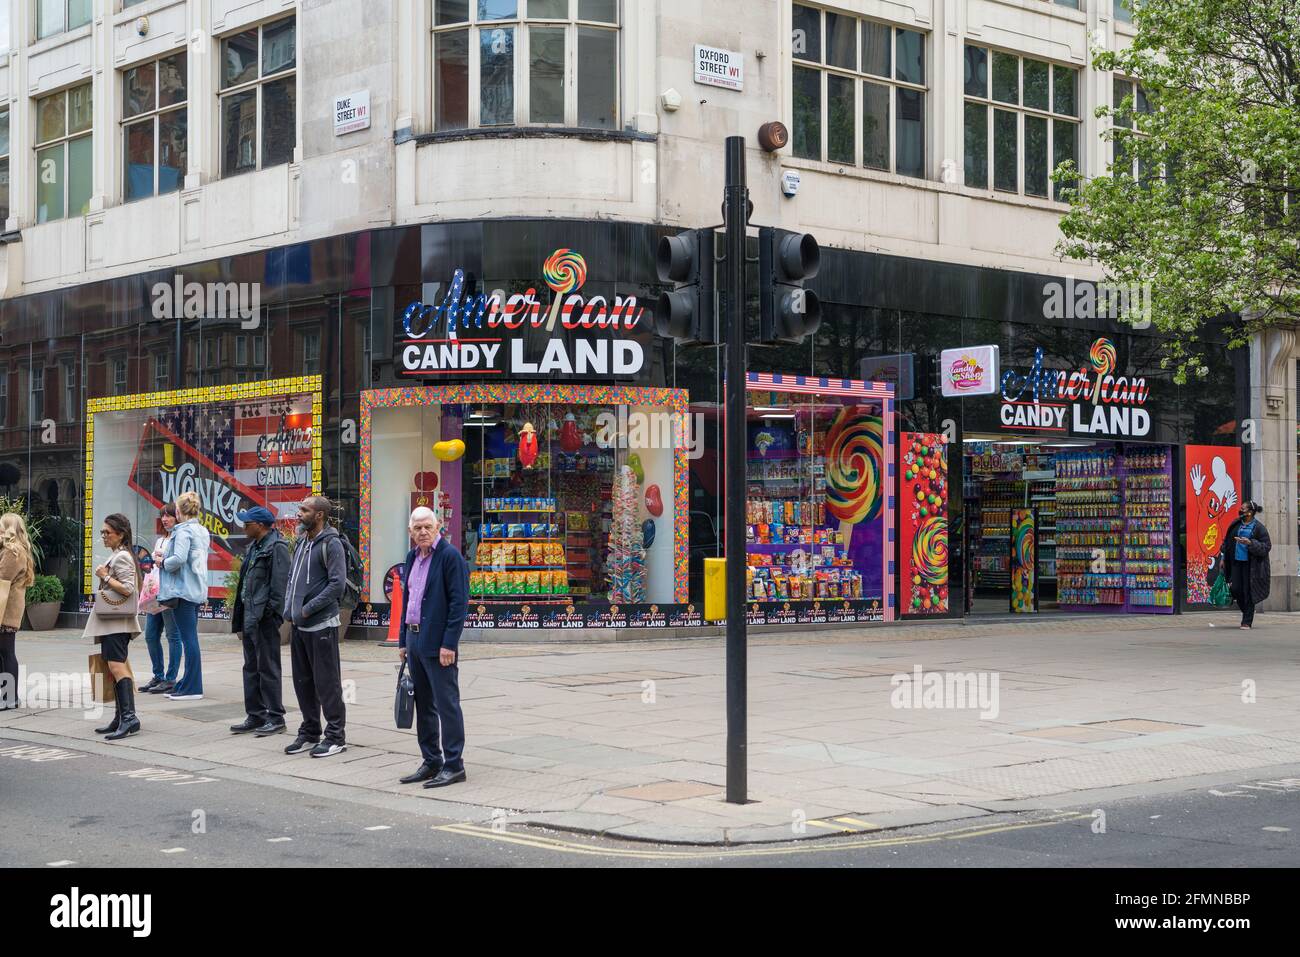 American Candy Land, a shop selling American confectionery on Oxford Street, London, England, UK Stock Photo